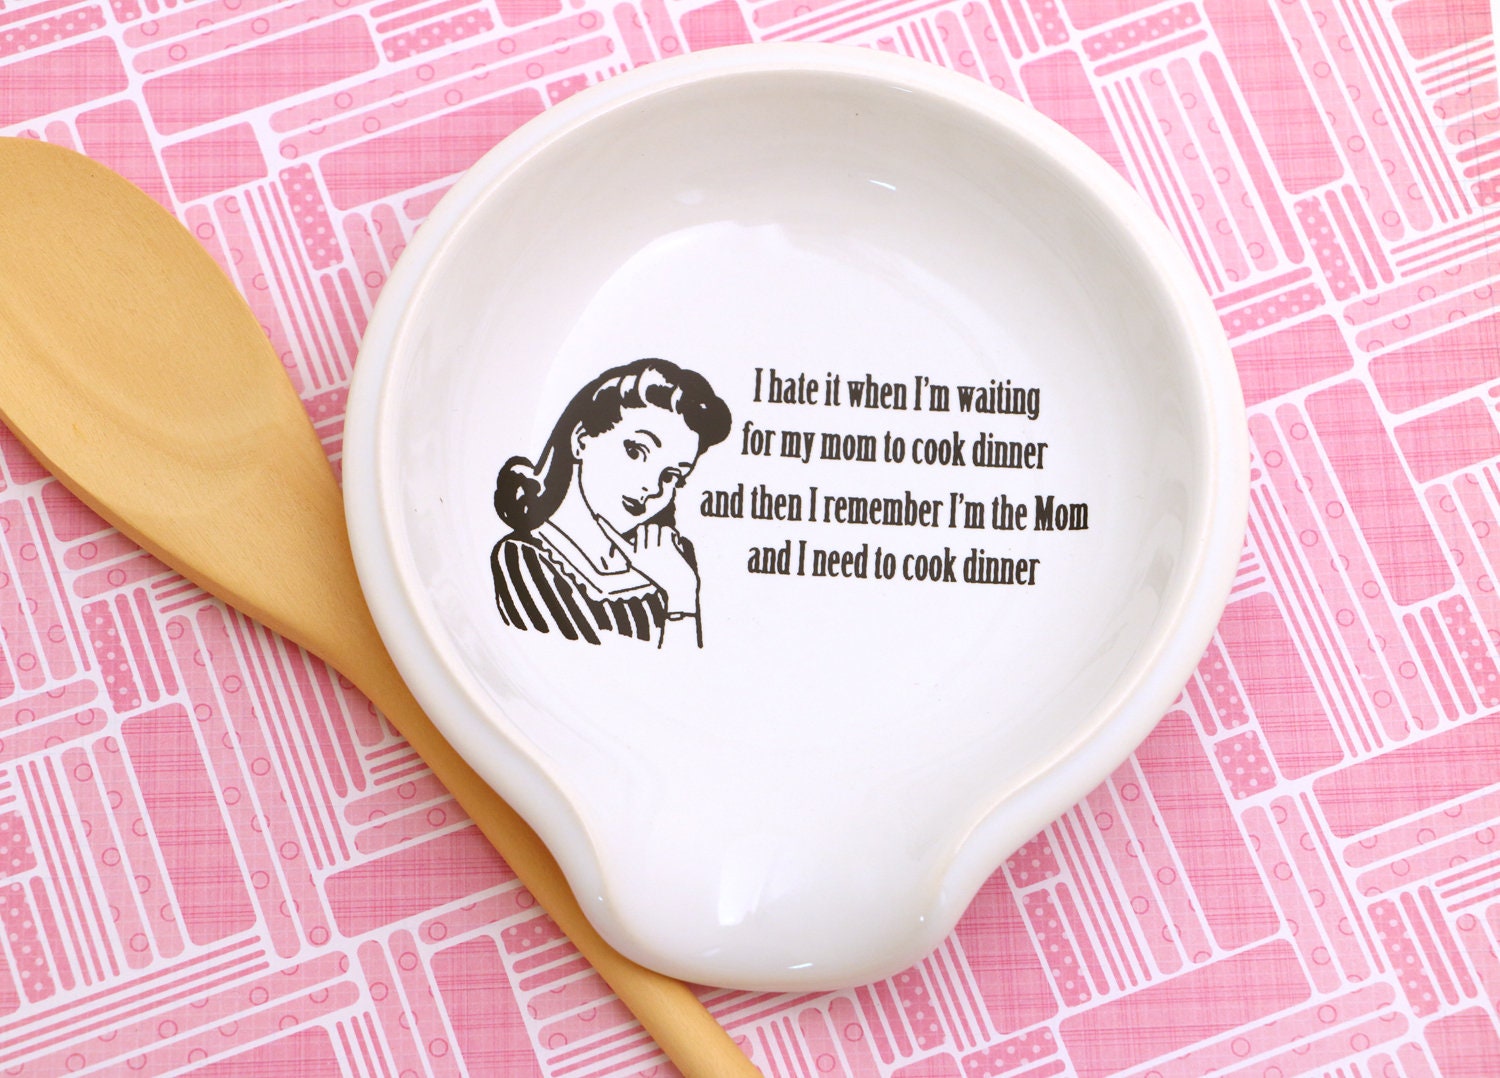 Totalee Gifts Fun Ceramic Spoon Rest - Great Foodie Gift Basket Item! You Will Eat It and Like It